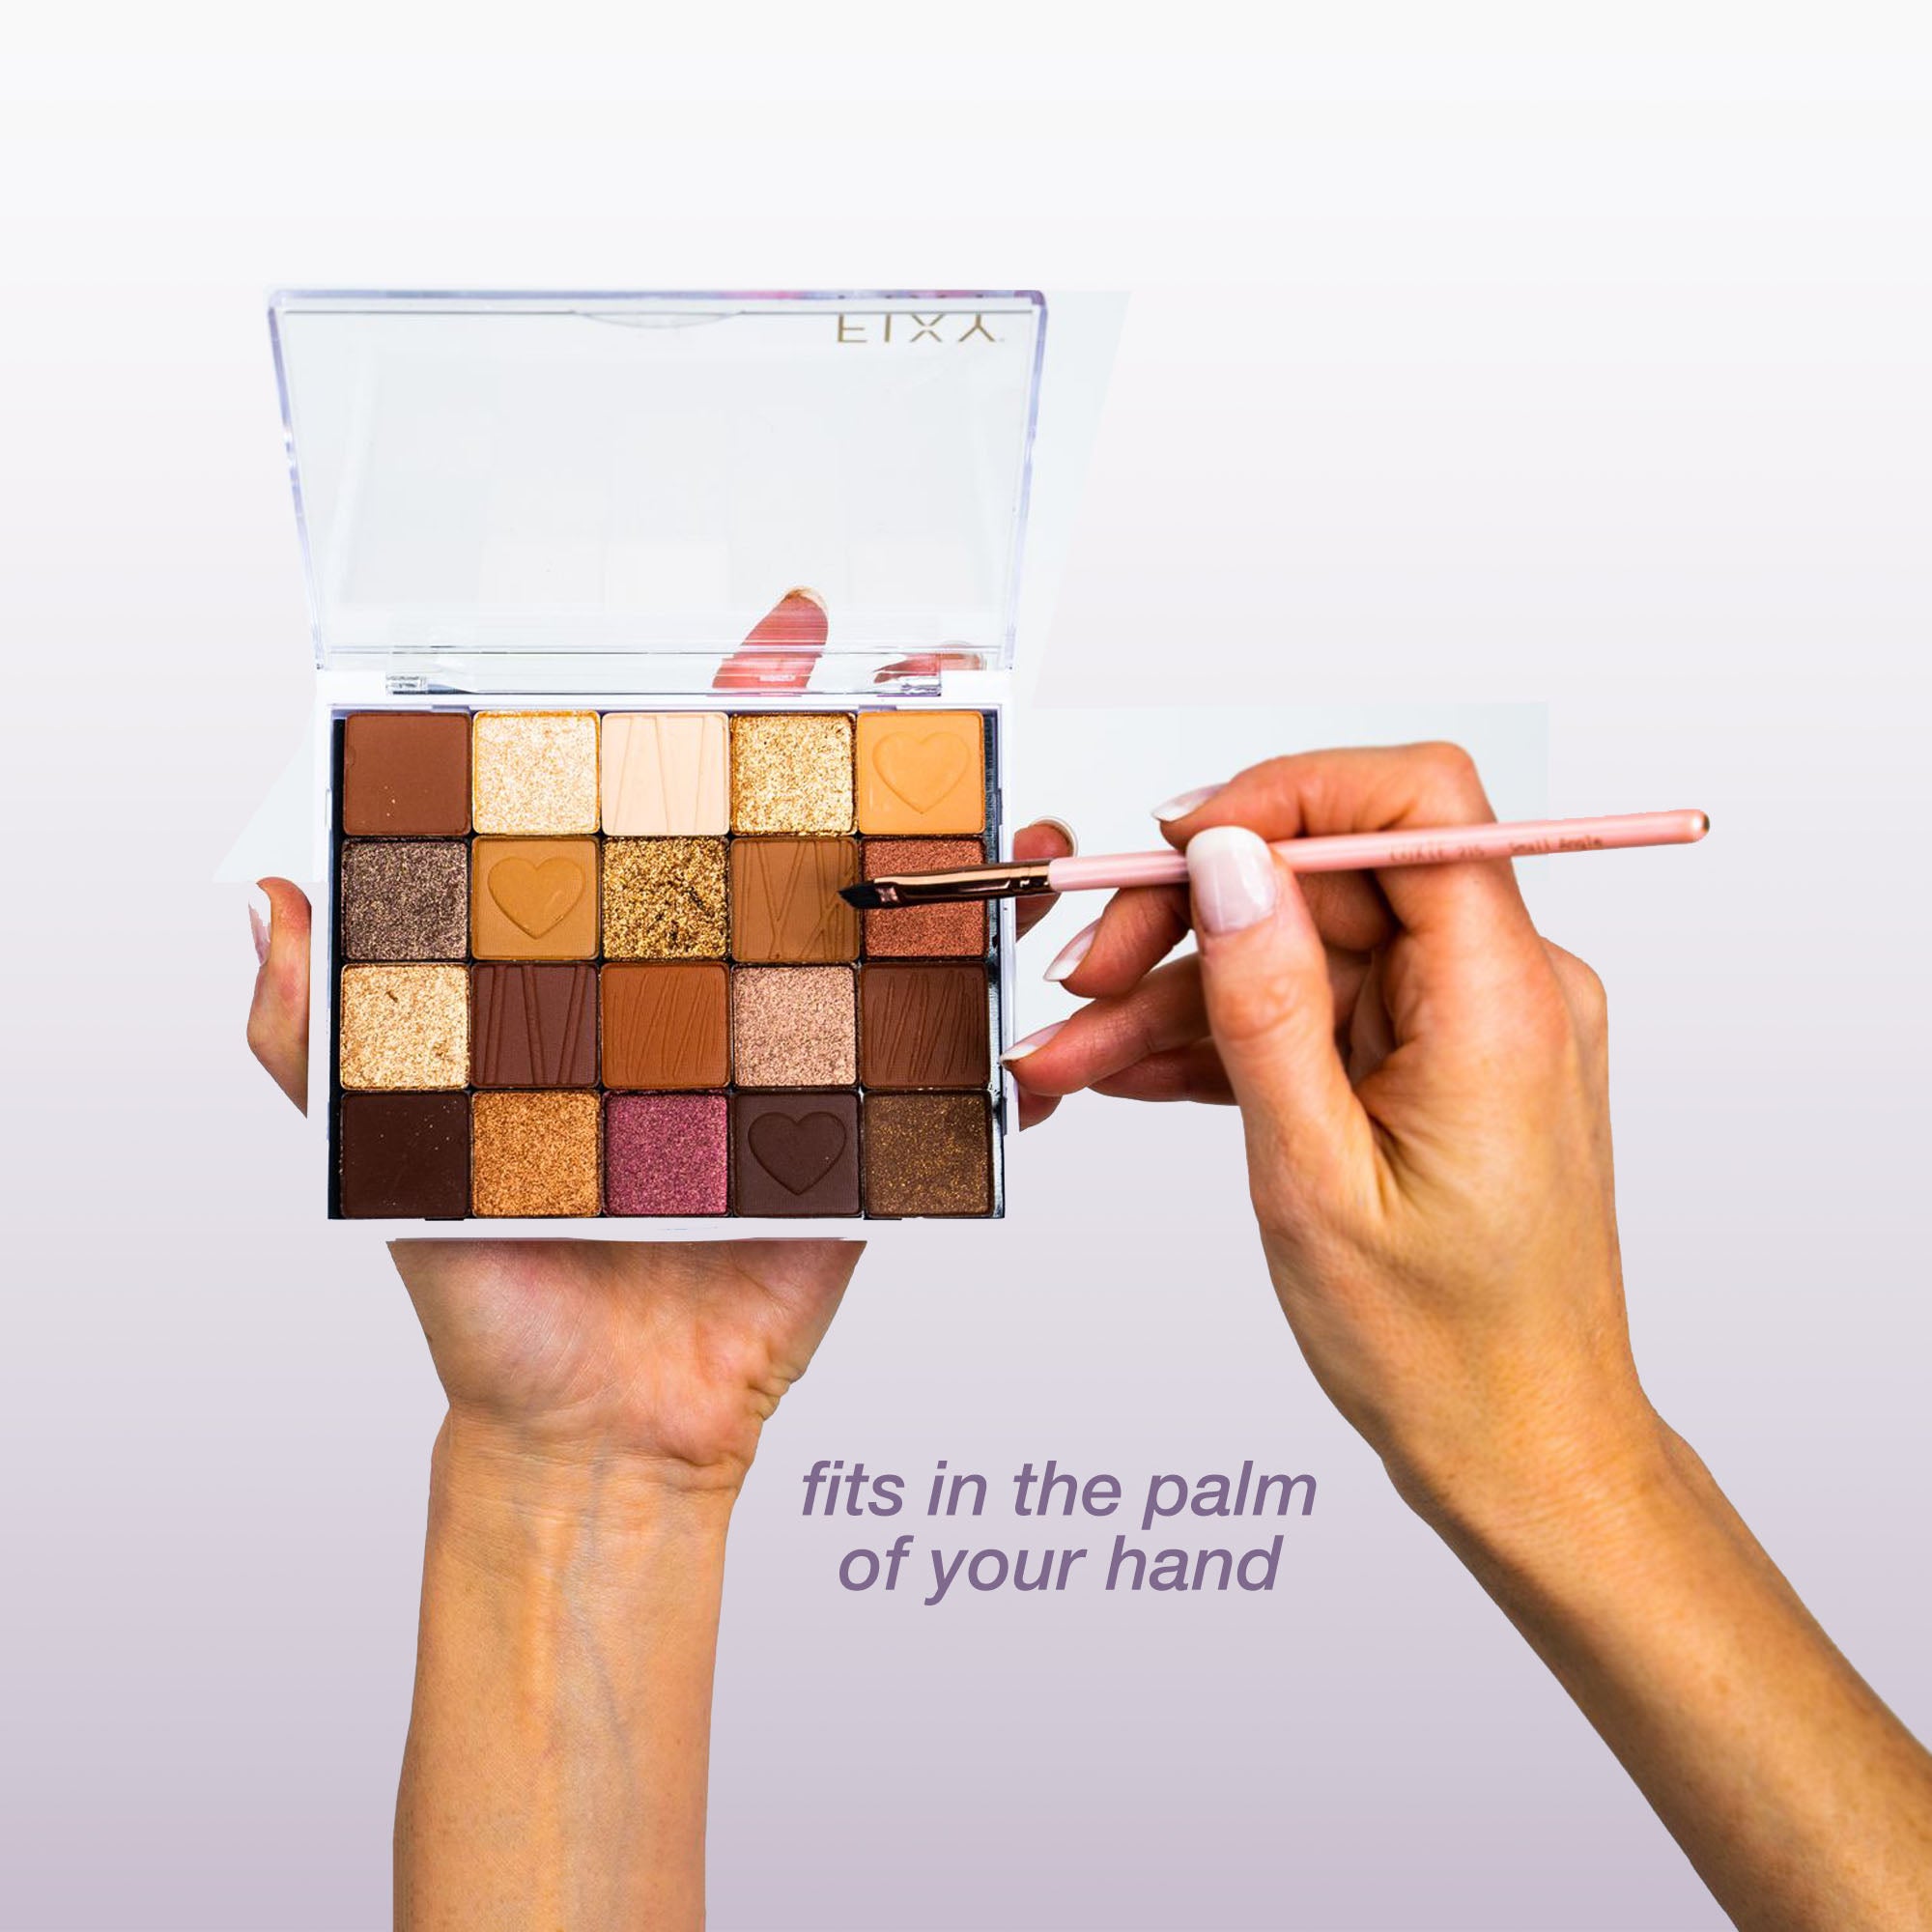 Hand holding a FIXY small clear makeup palette, filled with colorful eyeshadows and a brush applying makeup, demonstrating the palette&#39;s convenient size that fits in the palm of your hand for easy use and portability.